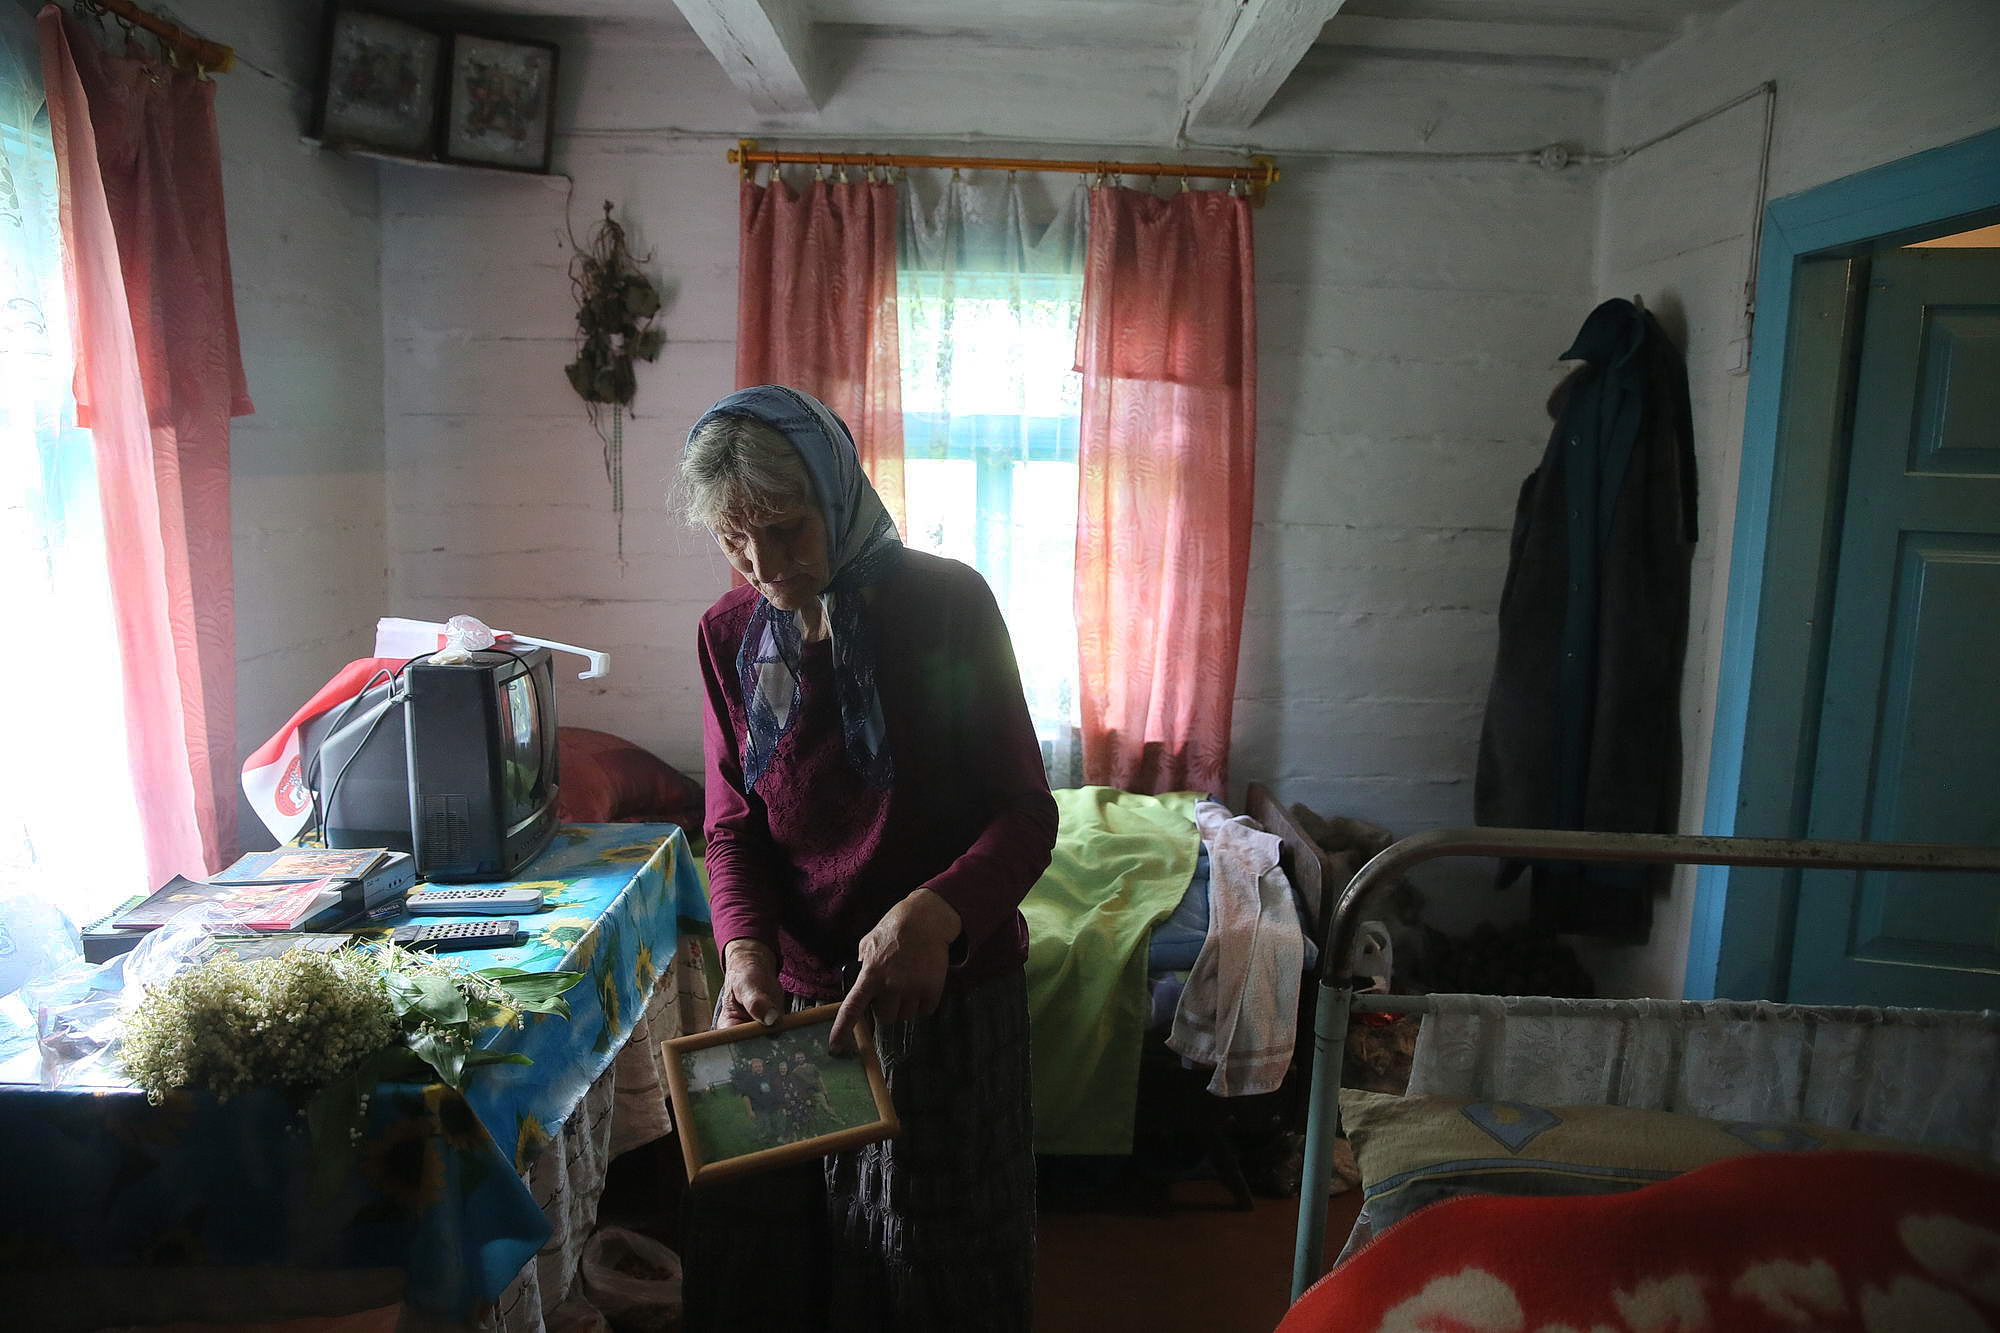 Oleksandra Vaseiko shows a photo of her with two Polish historians in her house in the village of Sokil in Volyn Oblast.